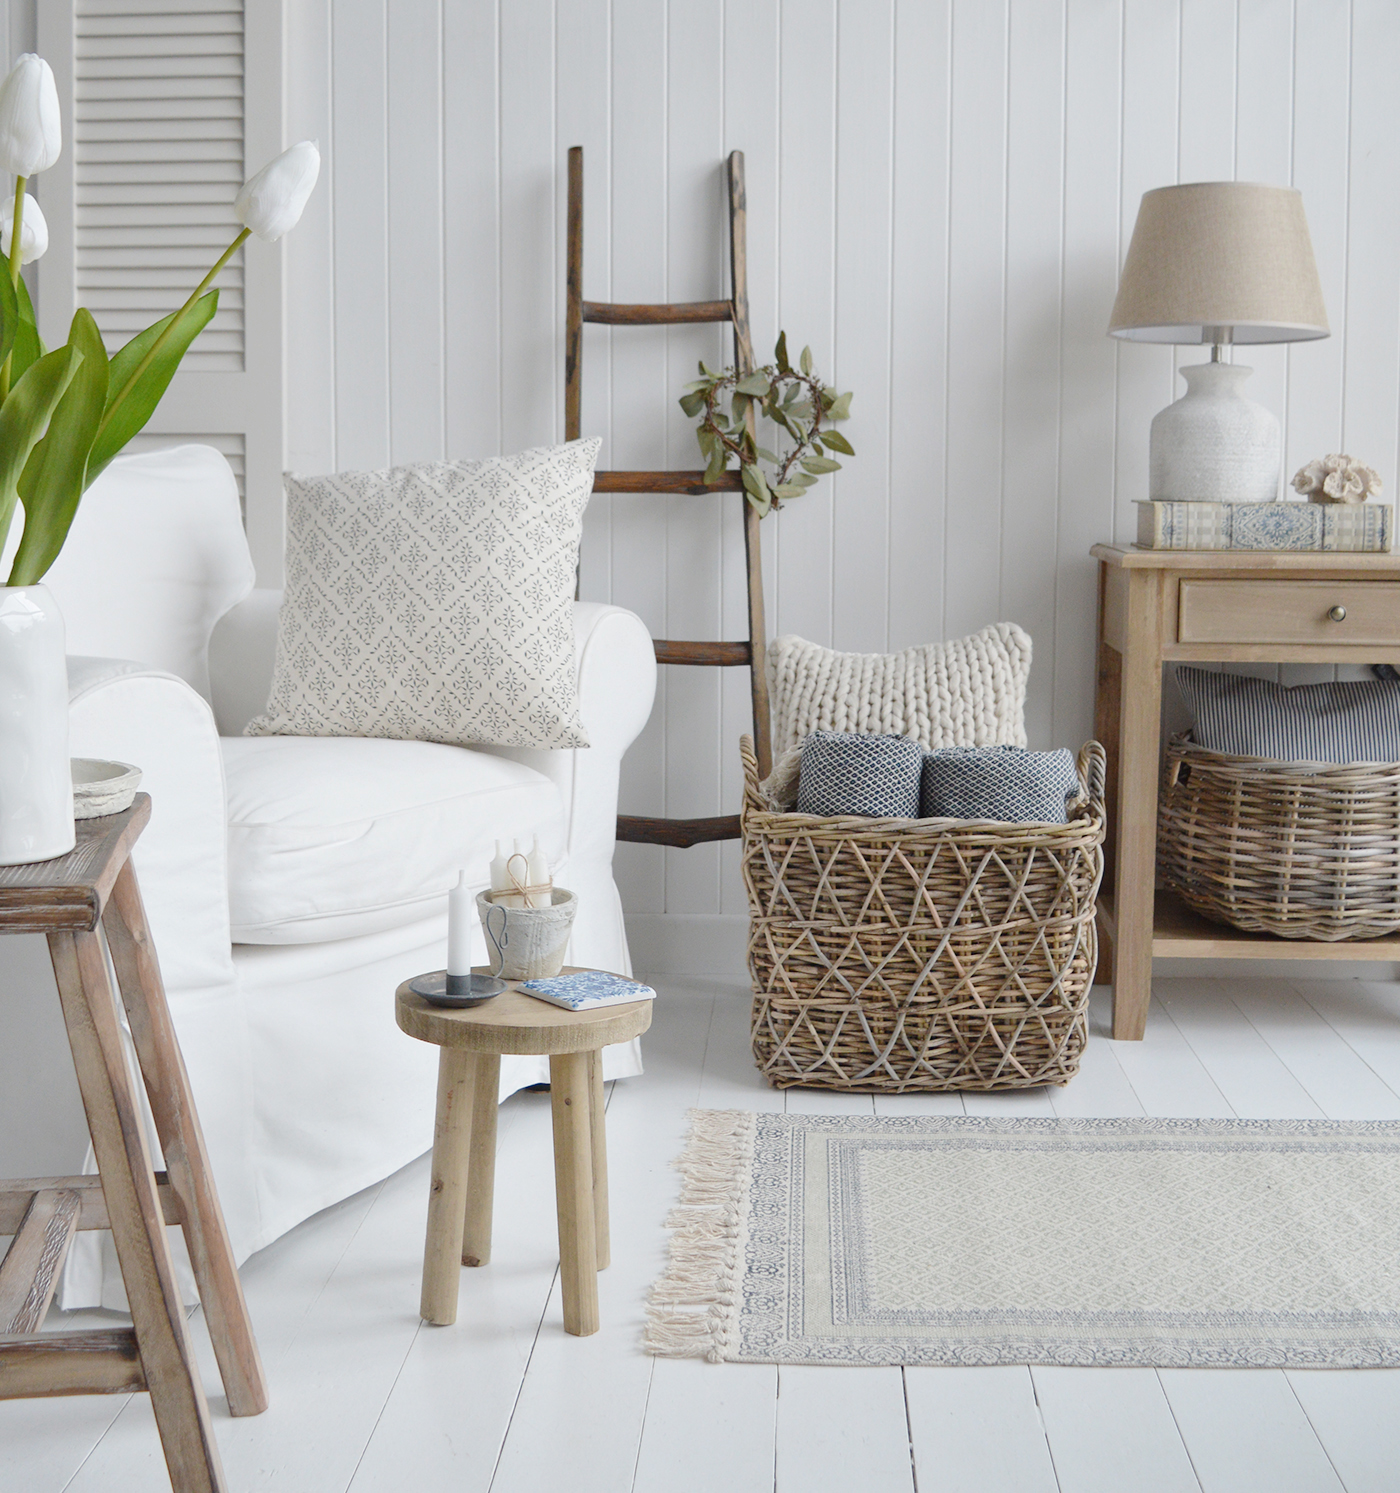 New England home interiors. Basket, cushions, throws and furniture for coastal and country homes